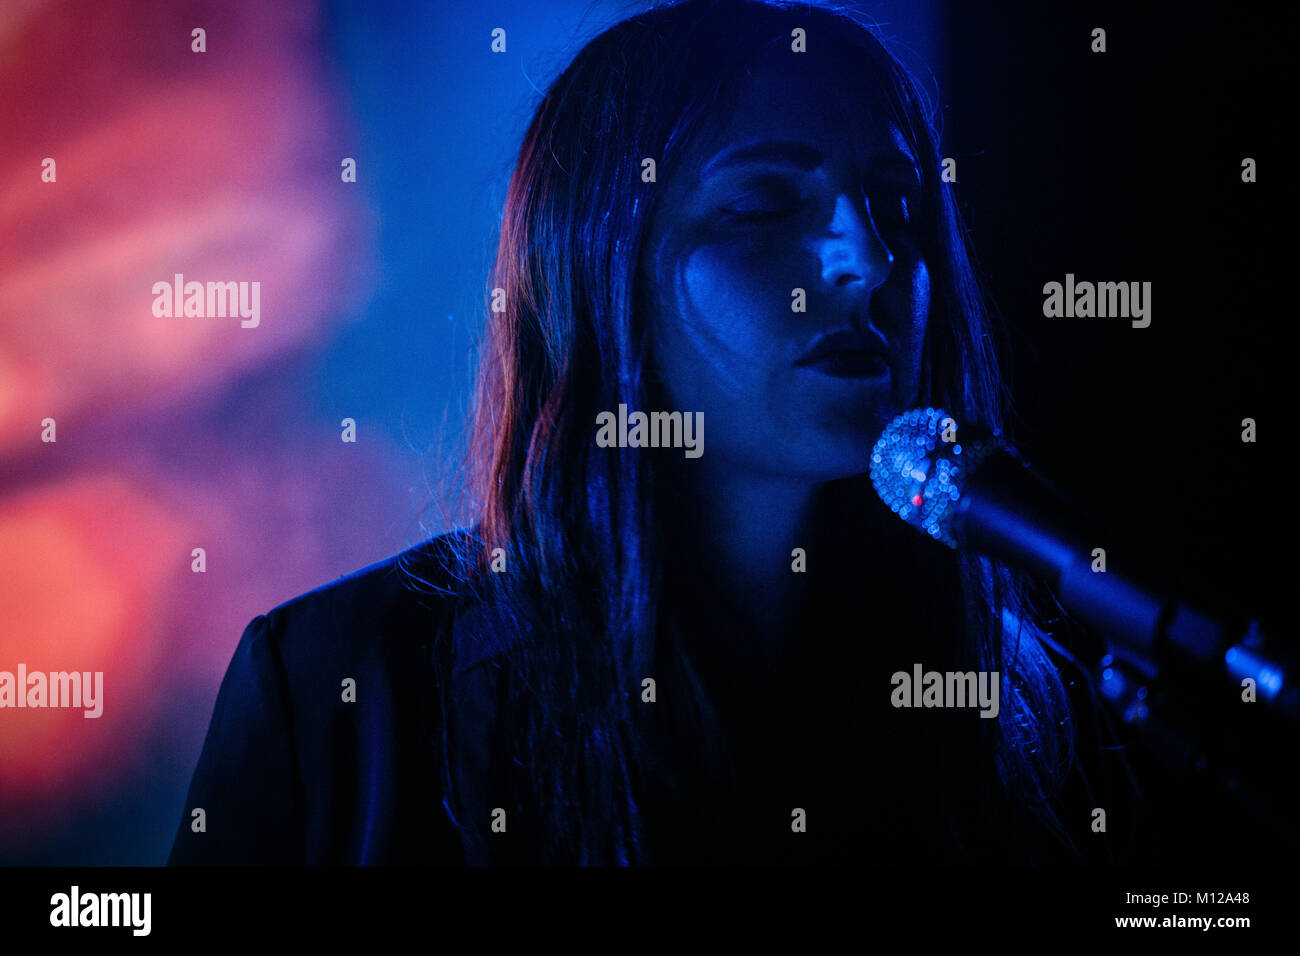 The American musical project Tropic of Cancer performs a live concert at Huset during the Danish music festival Frost Festival 2017 in Copenhagen. Here singer, songwriter and musician Camella Lobo is seen live on stage. Denmark, 23/02 2017. Stock Photo